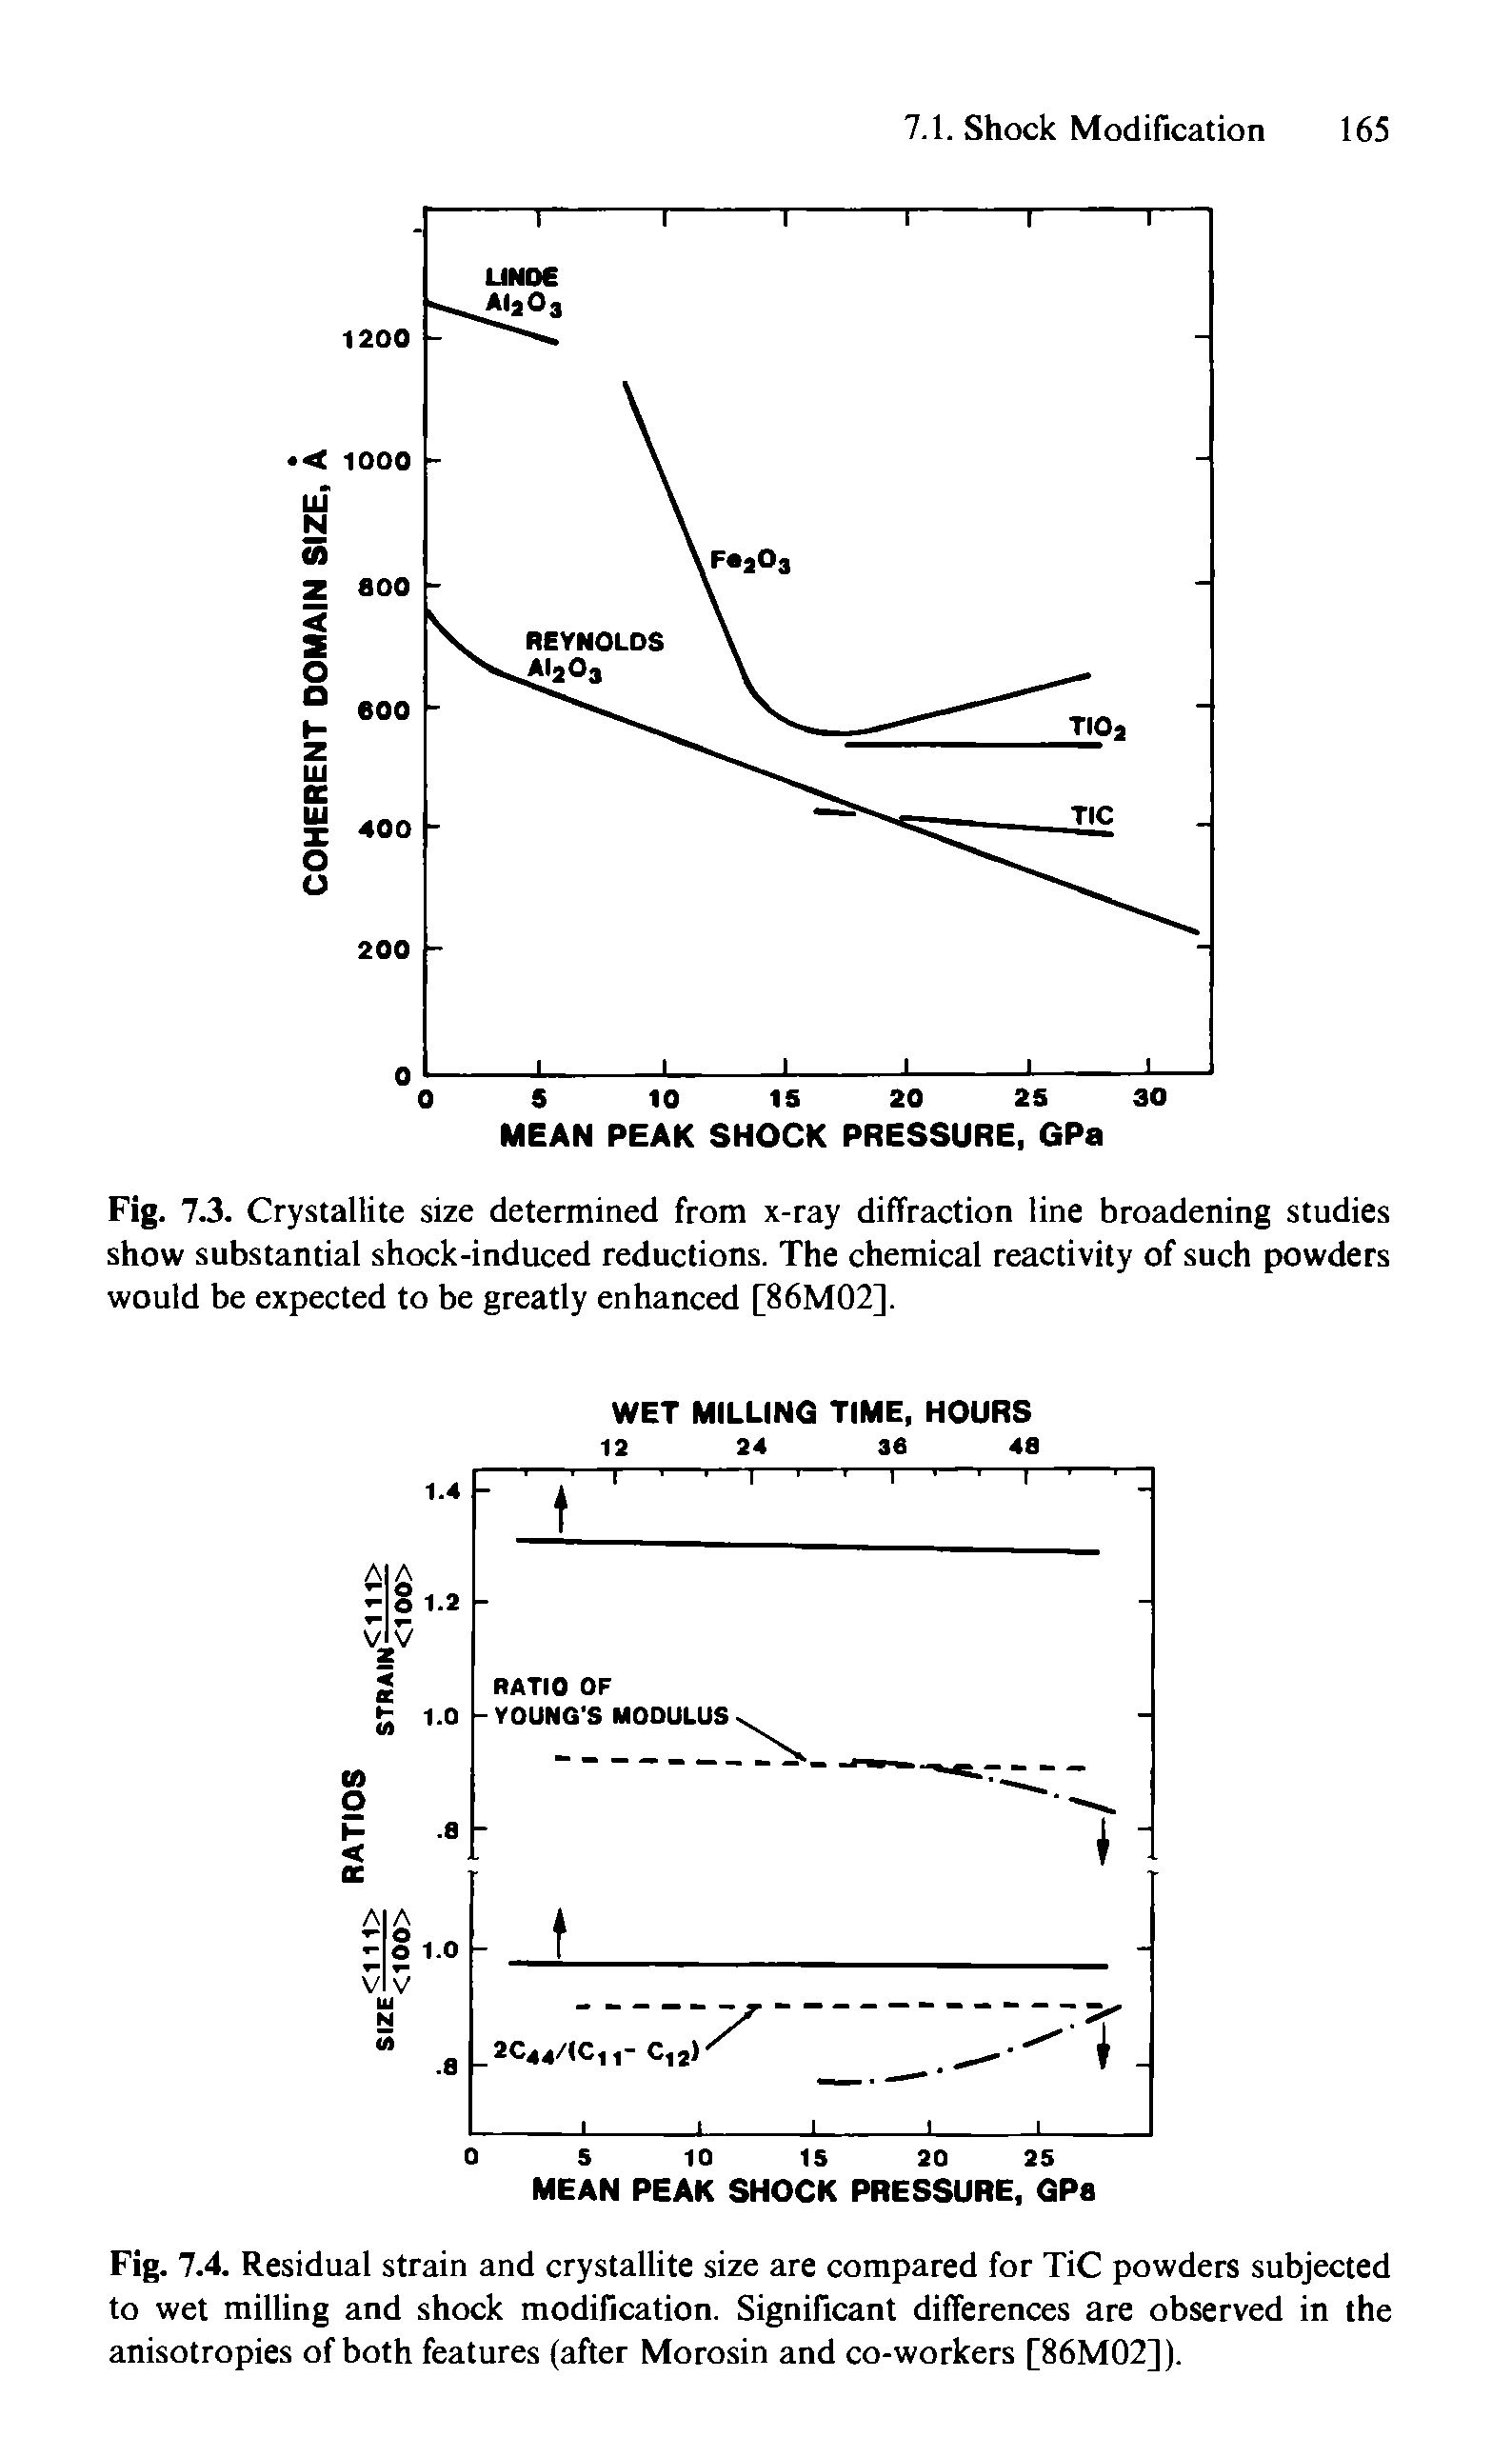 Fig. 7.3. Crystallite size determined from x-ray diffraction line broadening studies show substantial shock-induced reductions. The chemical reactivity of such powders would be expected to be greatly enhanced [86M02].